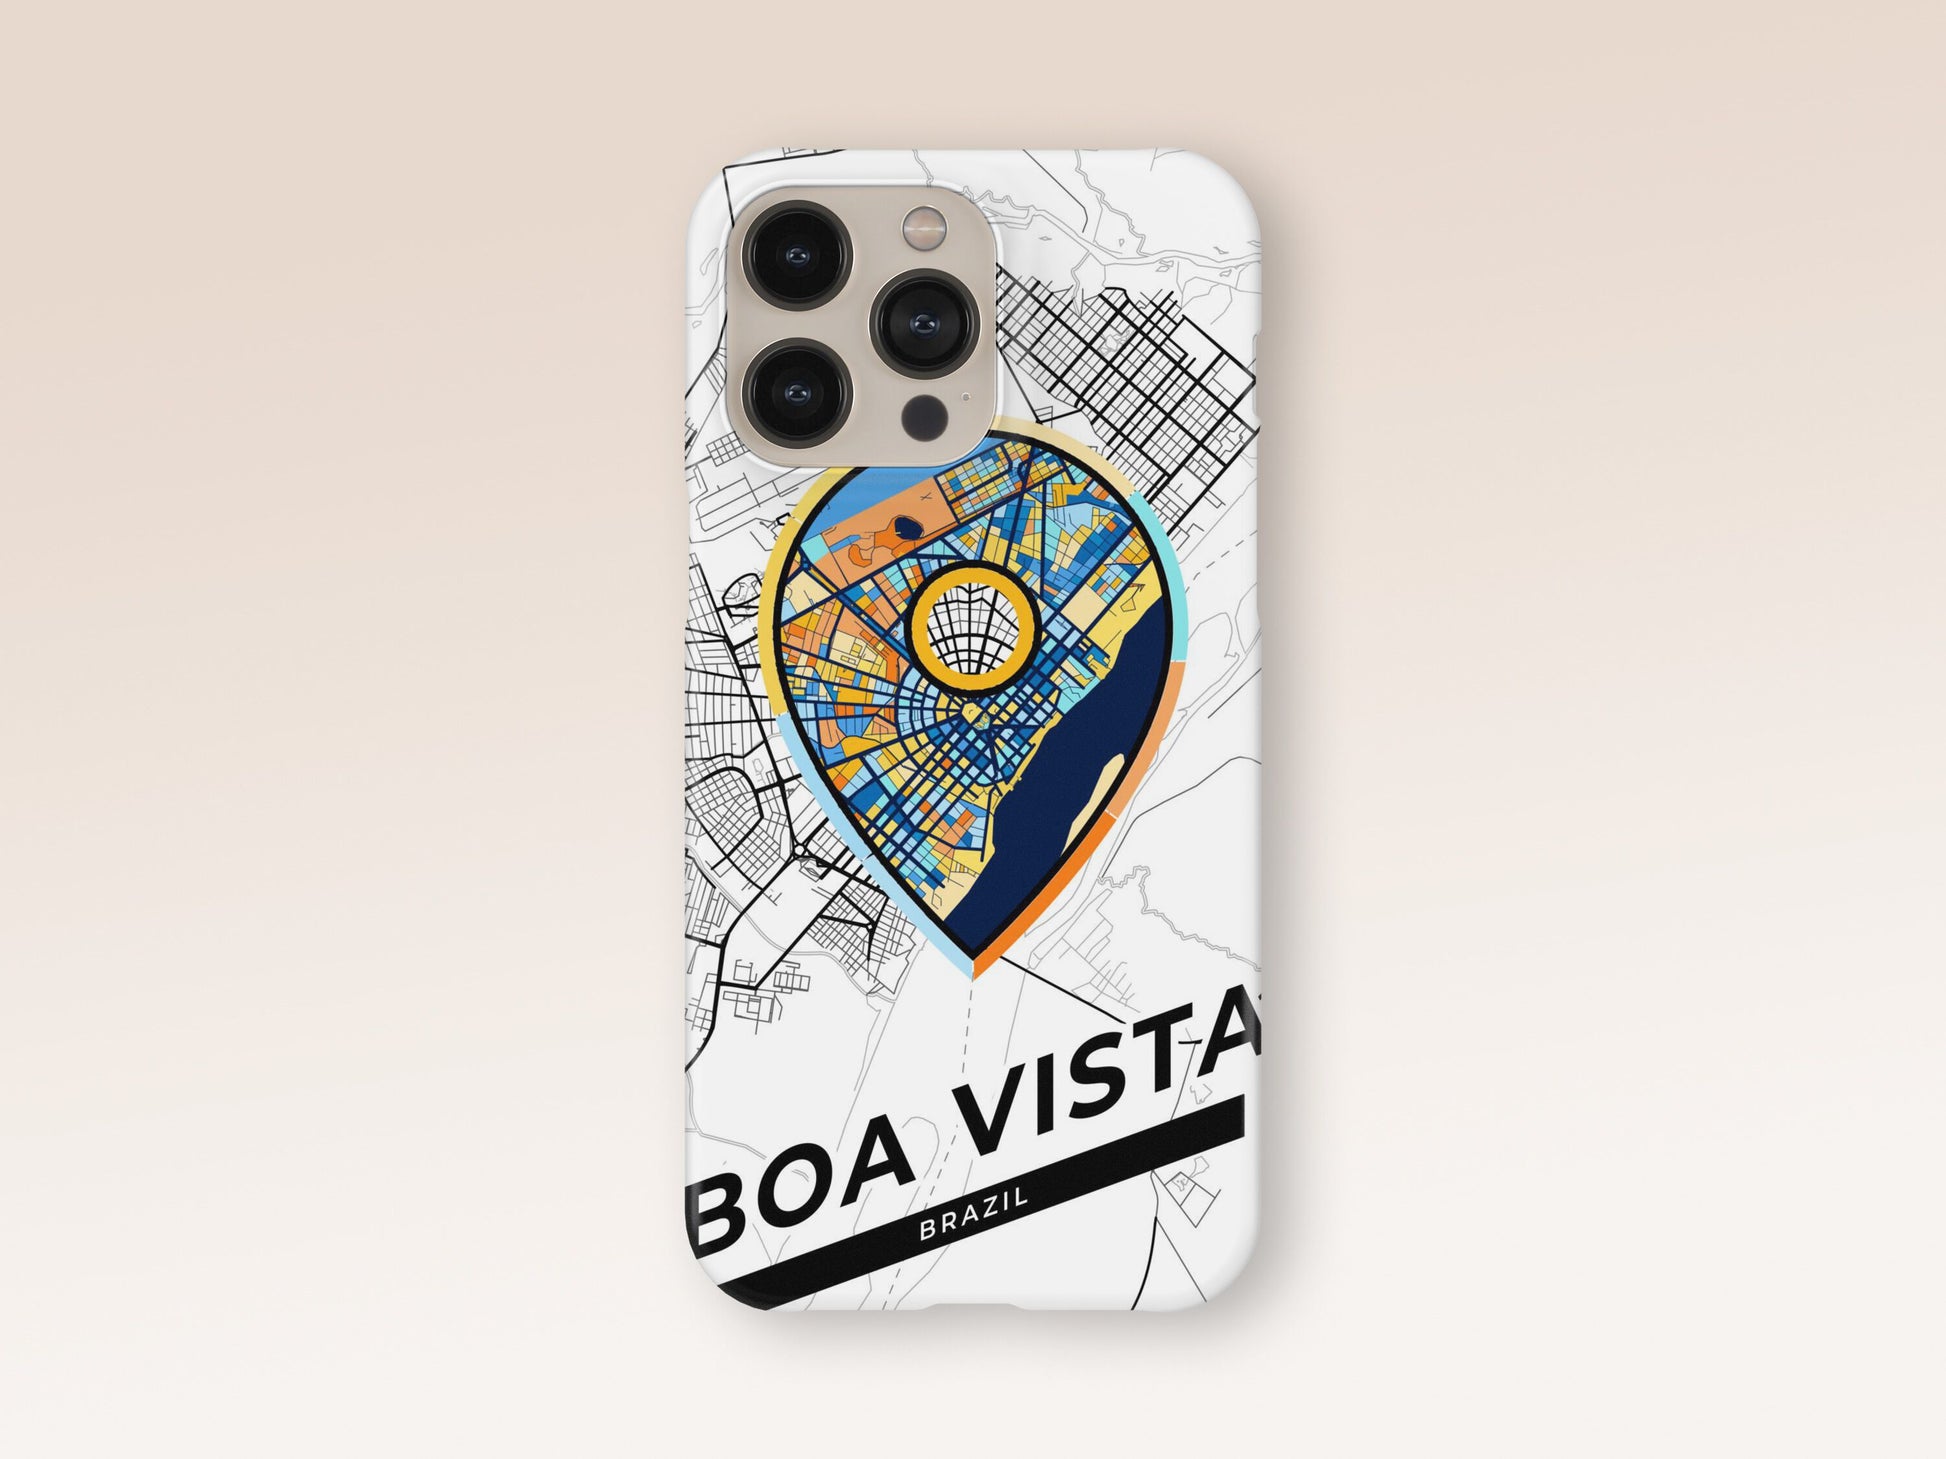 Boa Vista Brazil slim phone case with colorful icon. Birthday, wedding or housewarming gift. Couple match cases. 1